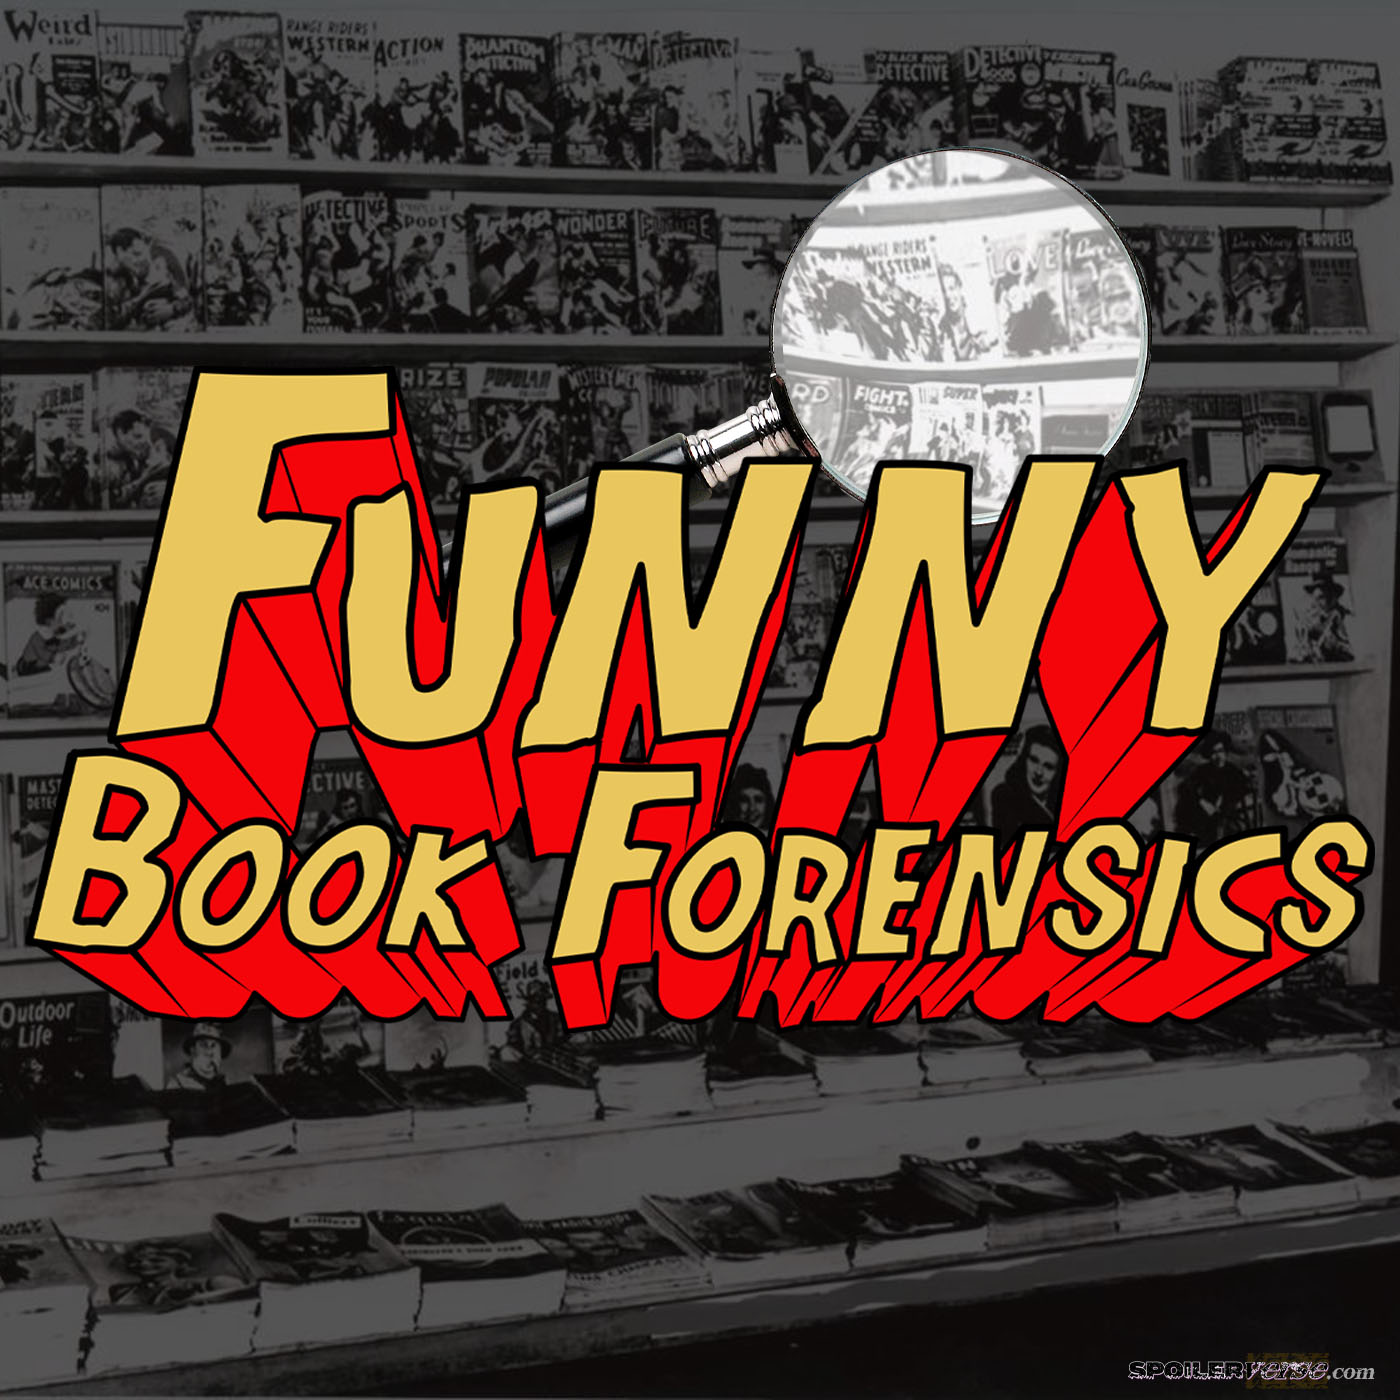 Funny Book Forensics 338 Why Ina Whay